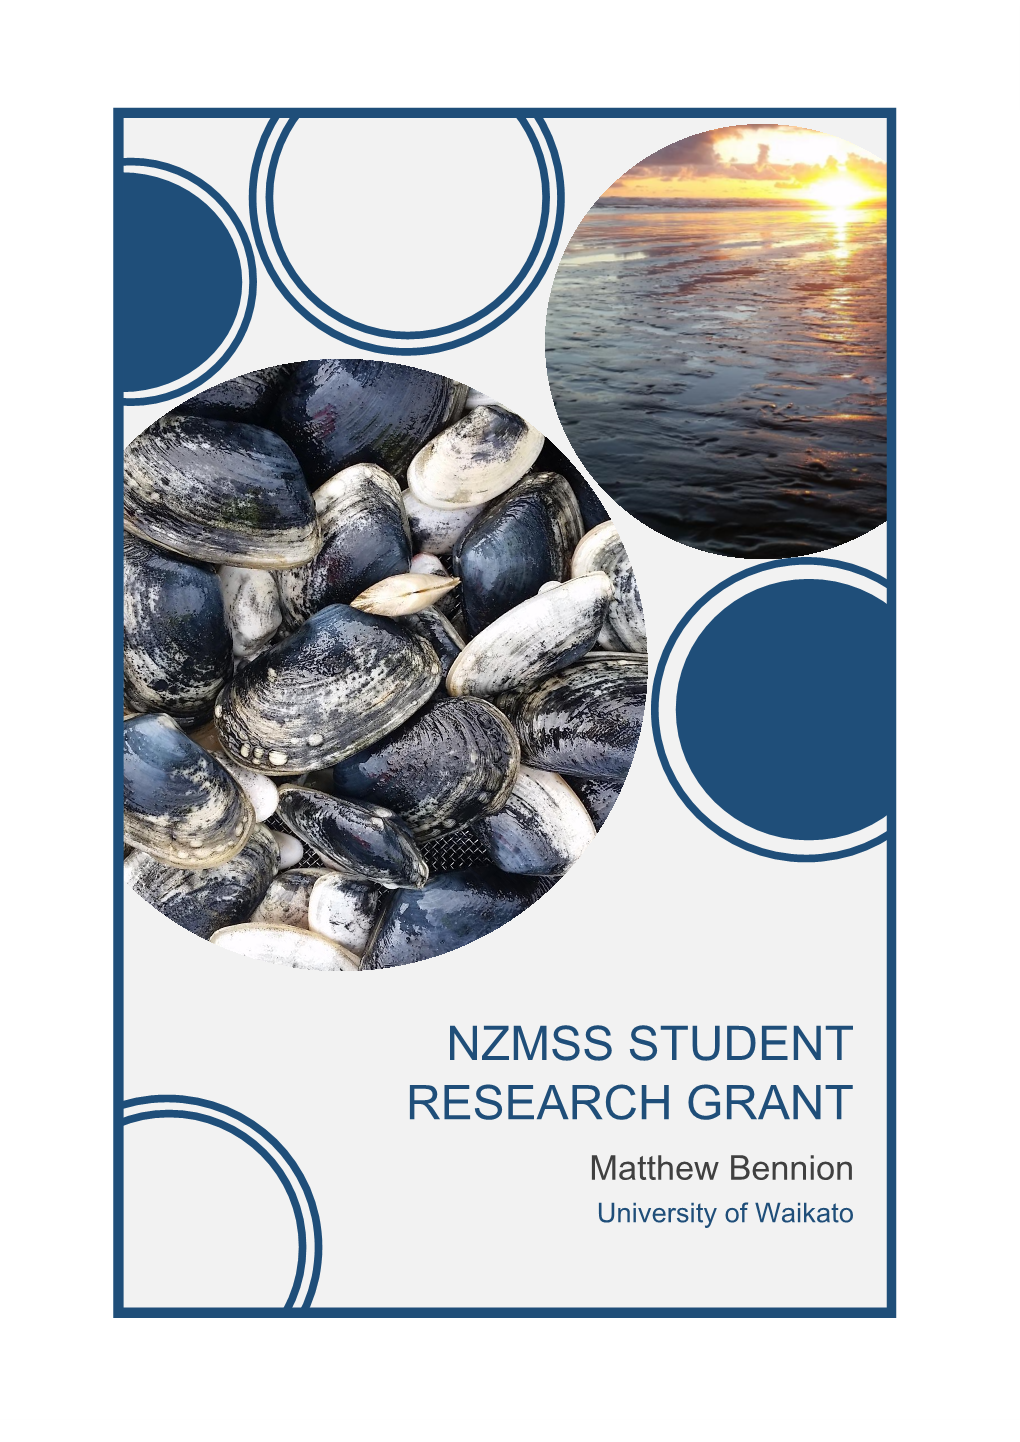 NZMSS Student Research Grant Report